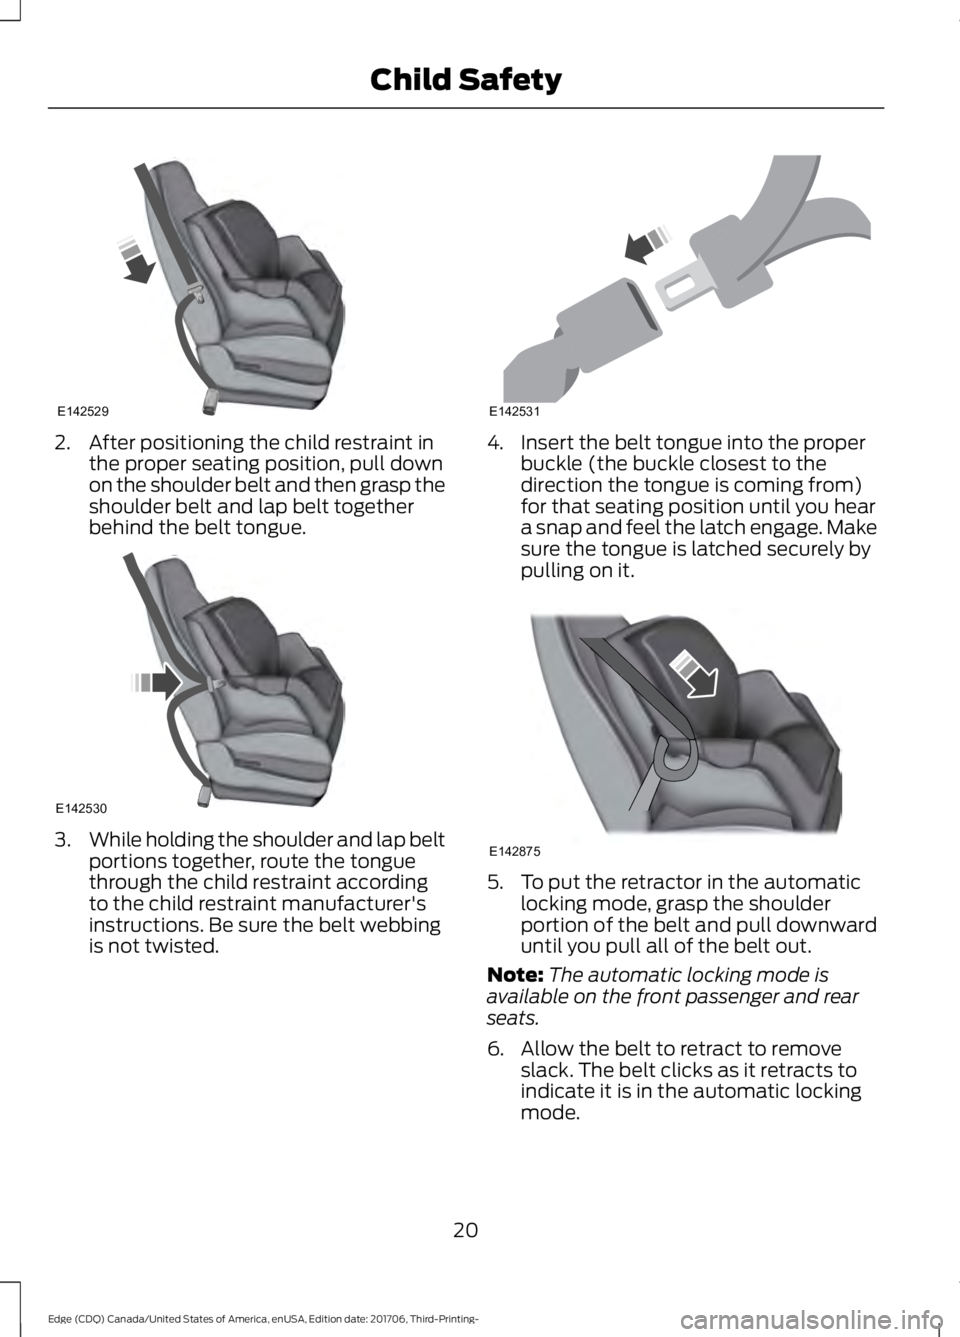 FORD EDGE 2018  Owners Manual 2. After positioning the child restraint in
the proper seating position, pull down
on the shoulder belt and then grasp the
shoulder belt and lap belt together
behind the belt tongue. 3.
While holding 